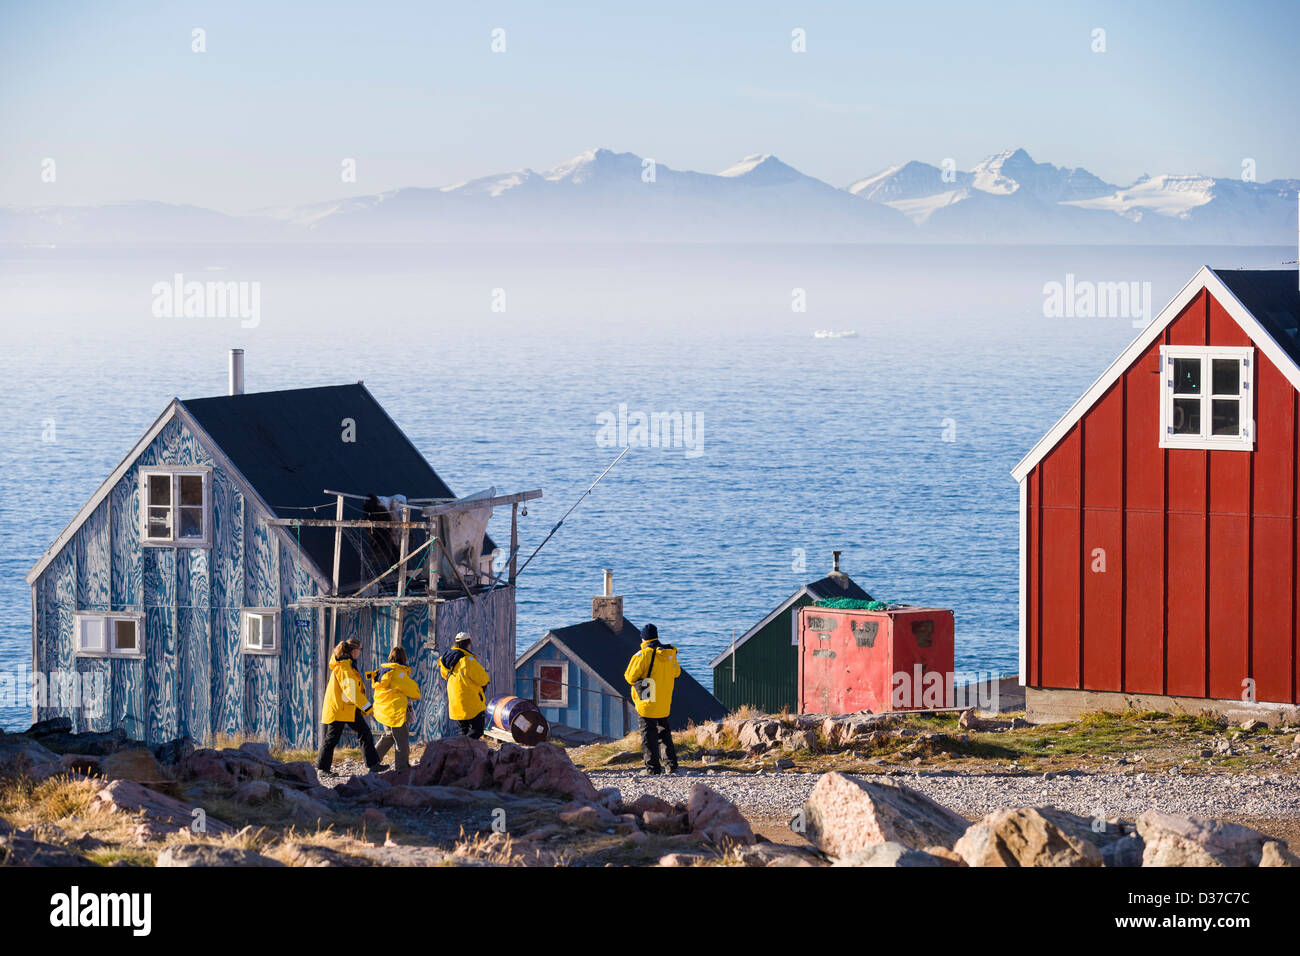 Village of Ittoqqortoormiit, Greenland Homes in the village of Ittoqqortoormiit, Scoresbysund, Greenland Stock Photo